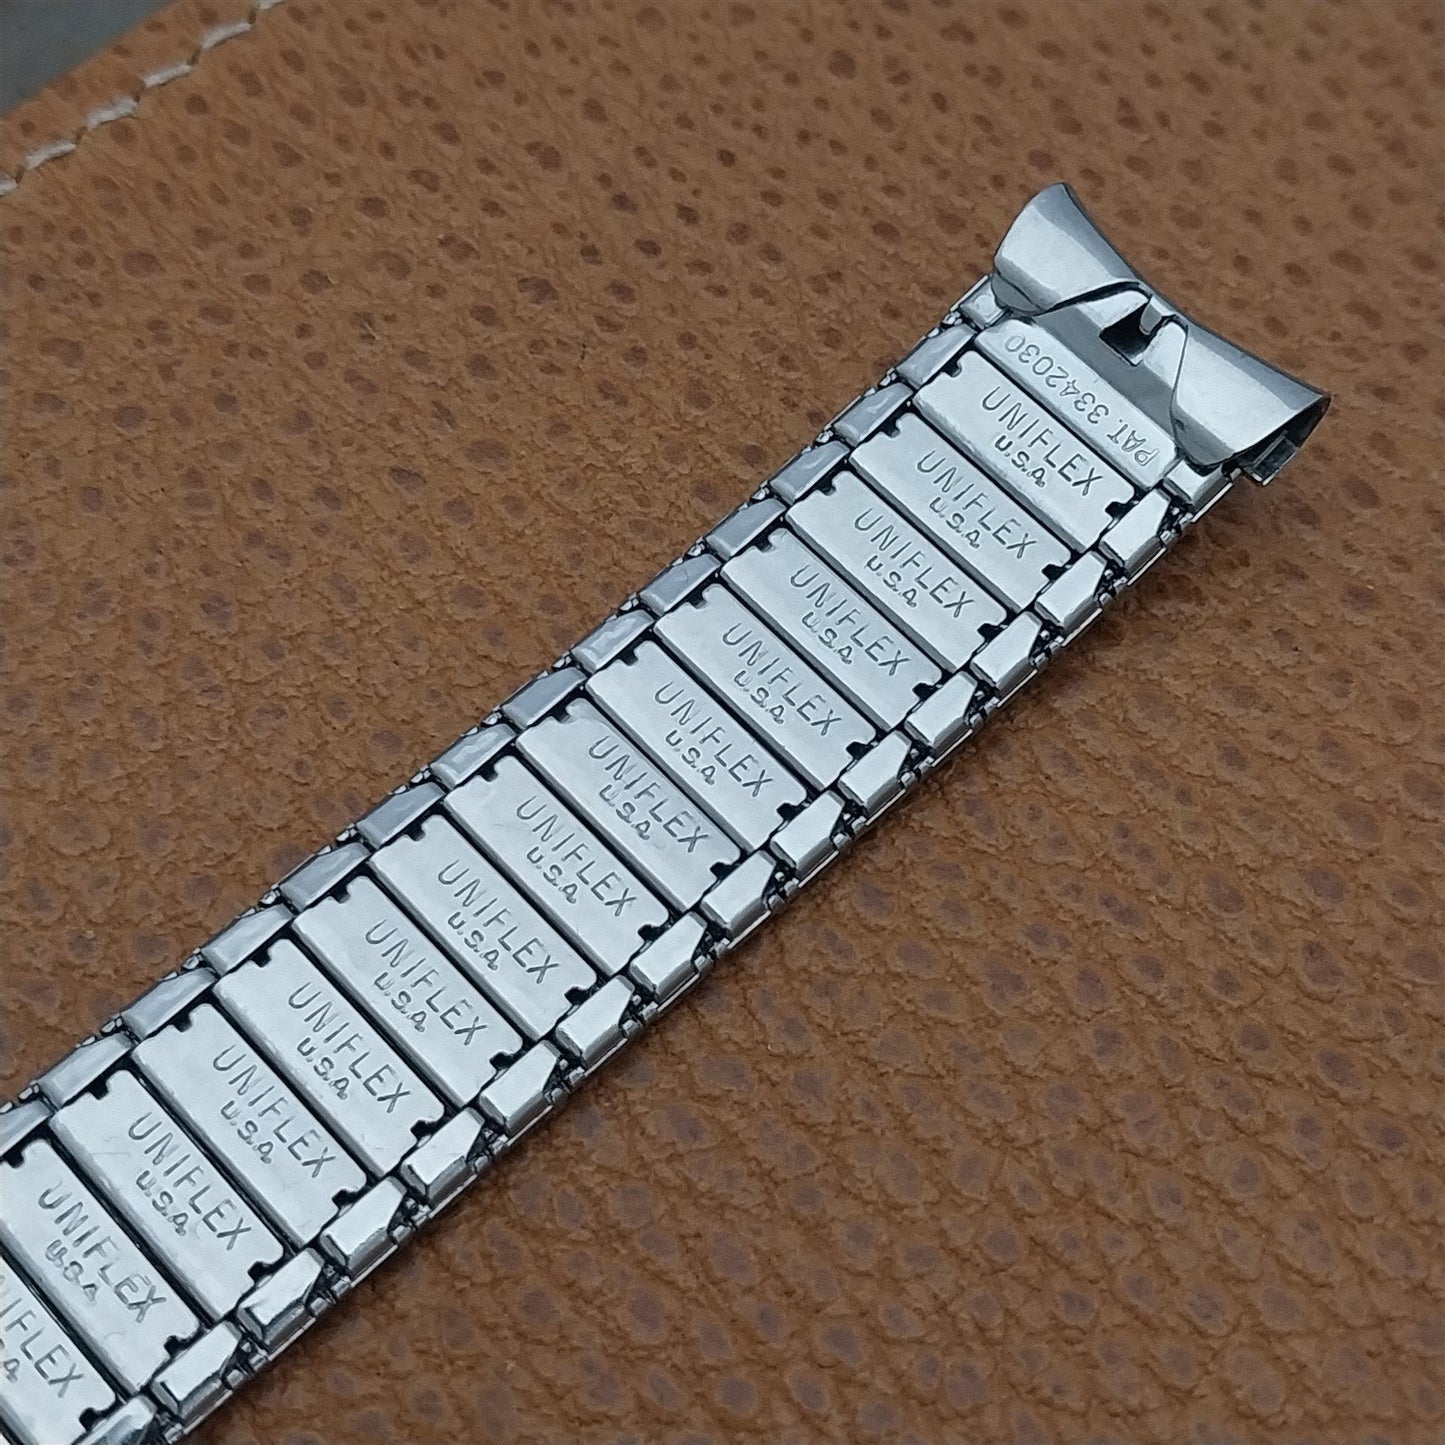 17.2mm Uniflex Stainless Steel Stretch Expansion Unused 1960s Vintage Watch Band